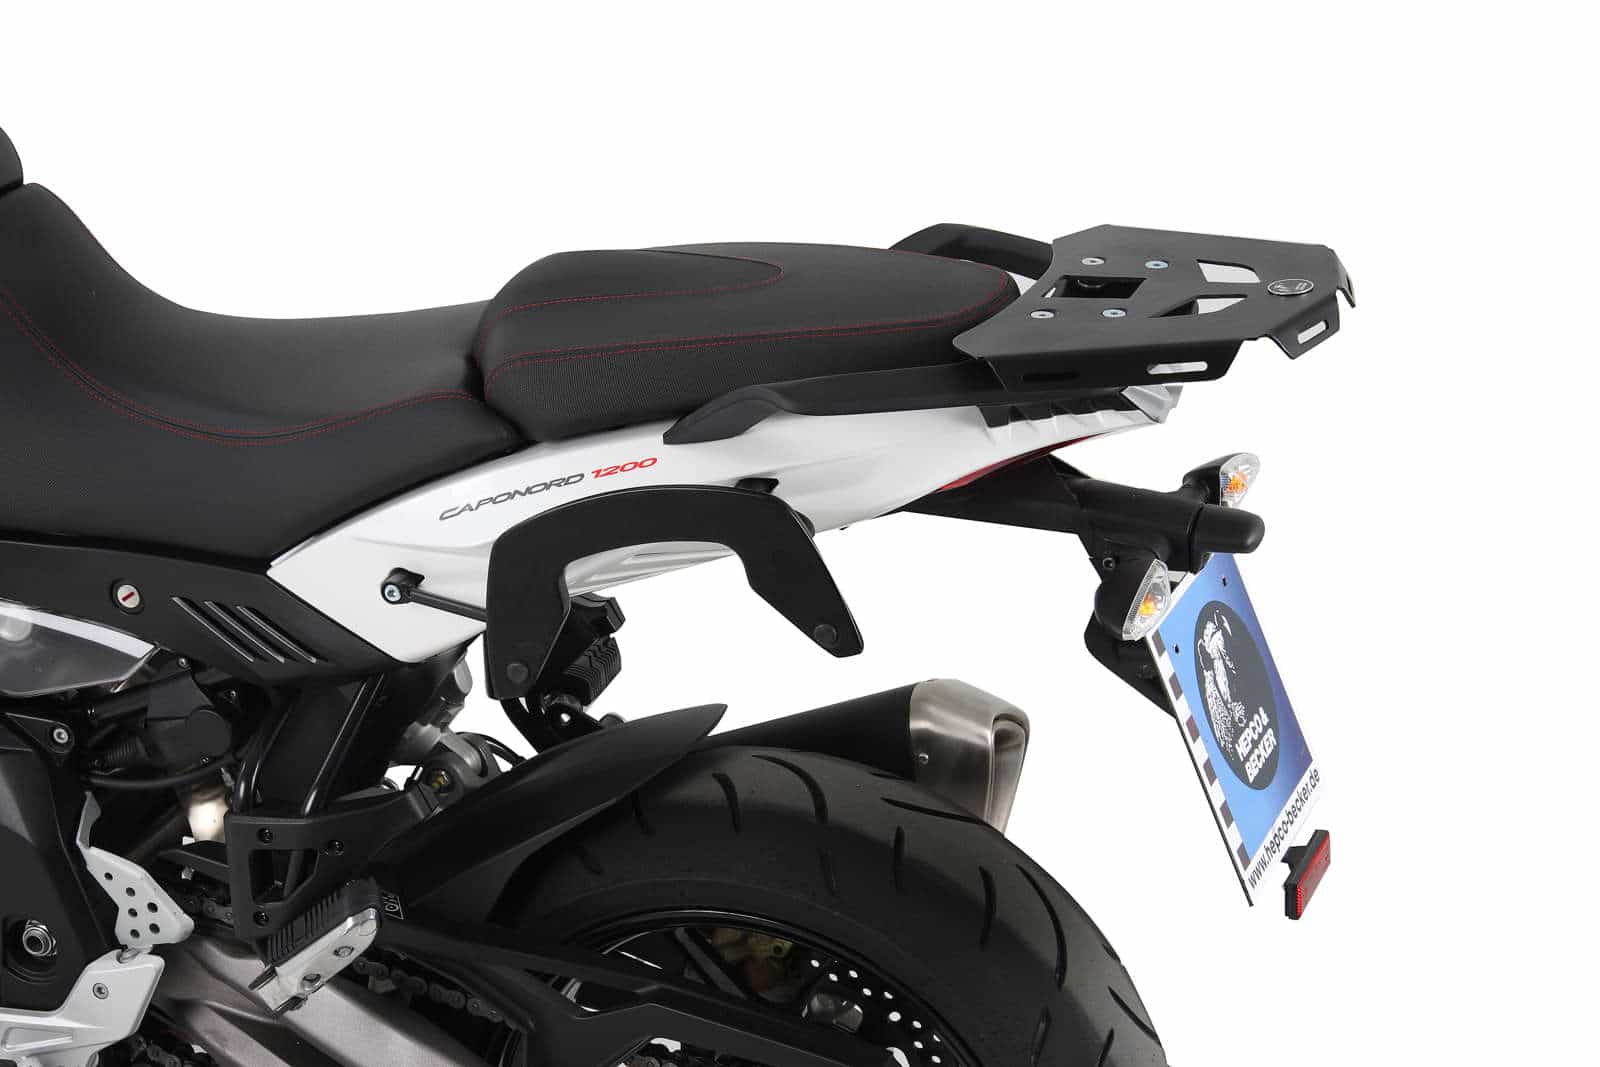 C-Bow sidecarrier for Aprilia Caponord 1200 (2013-2016)